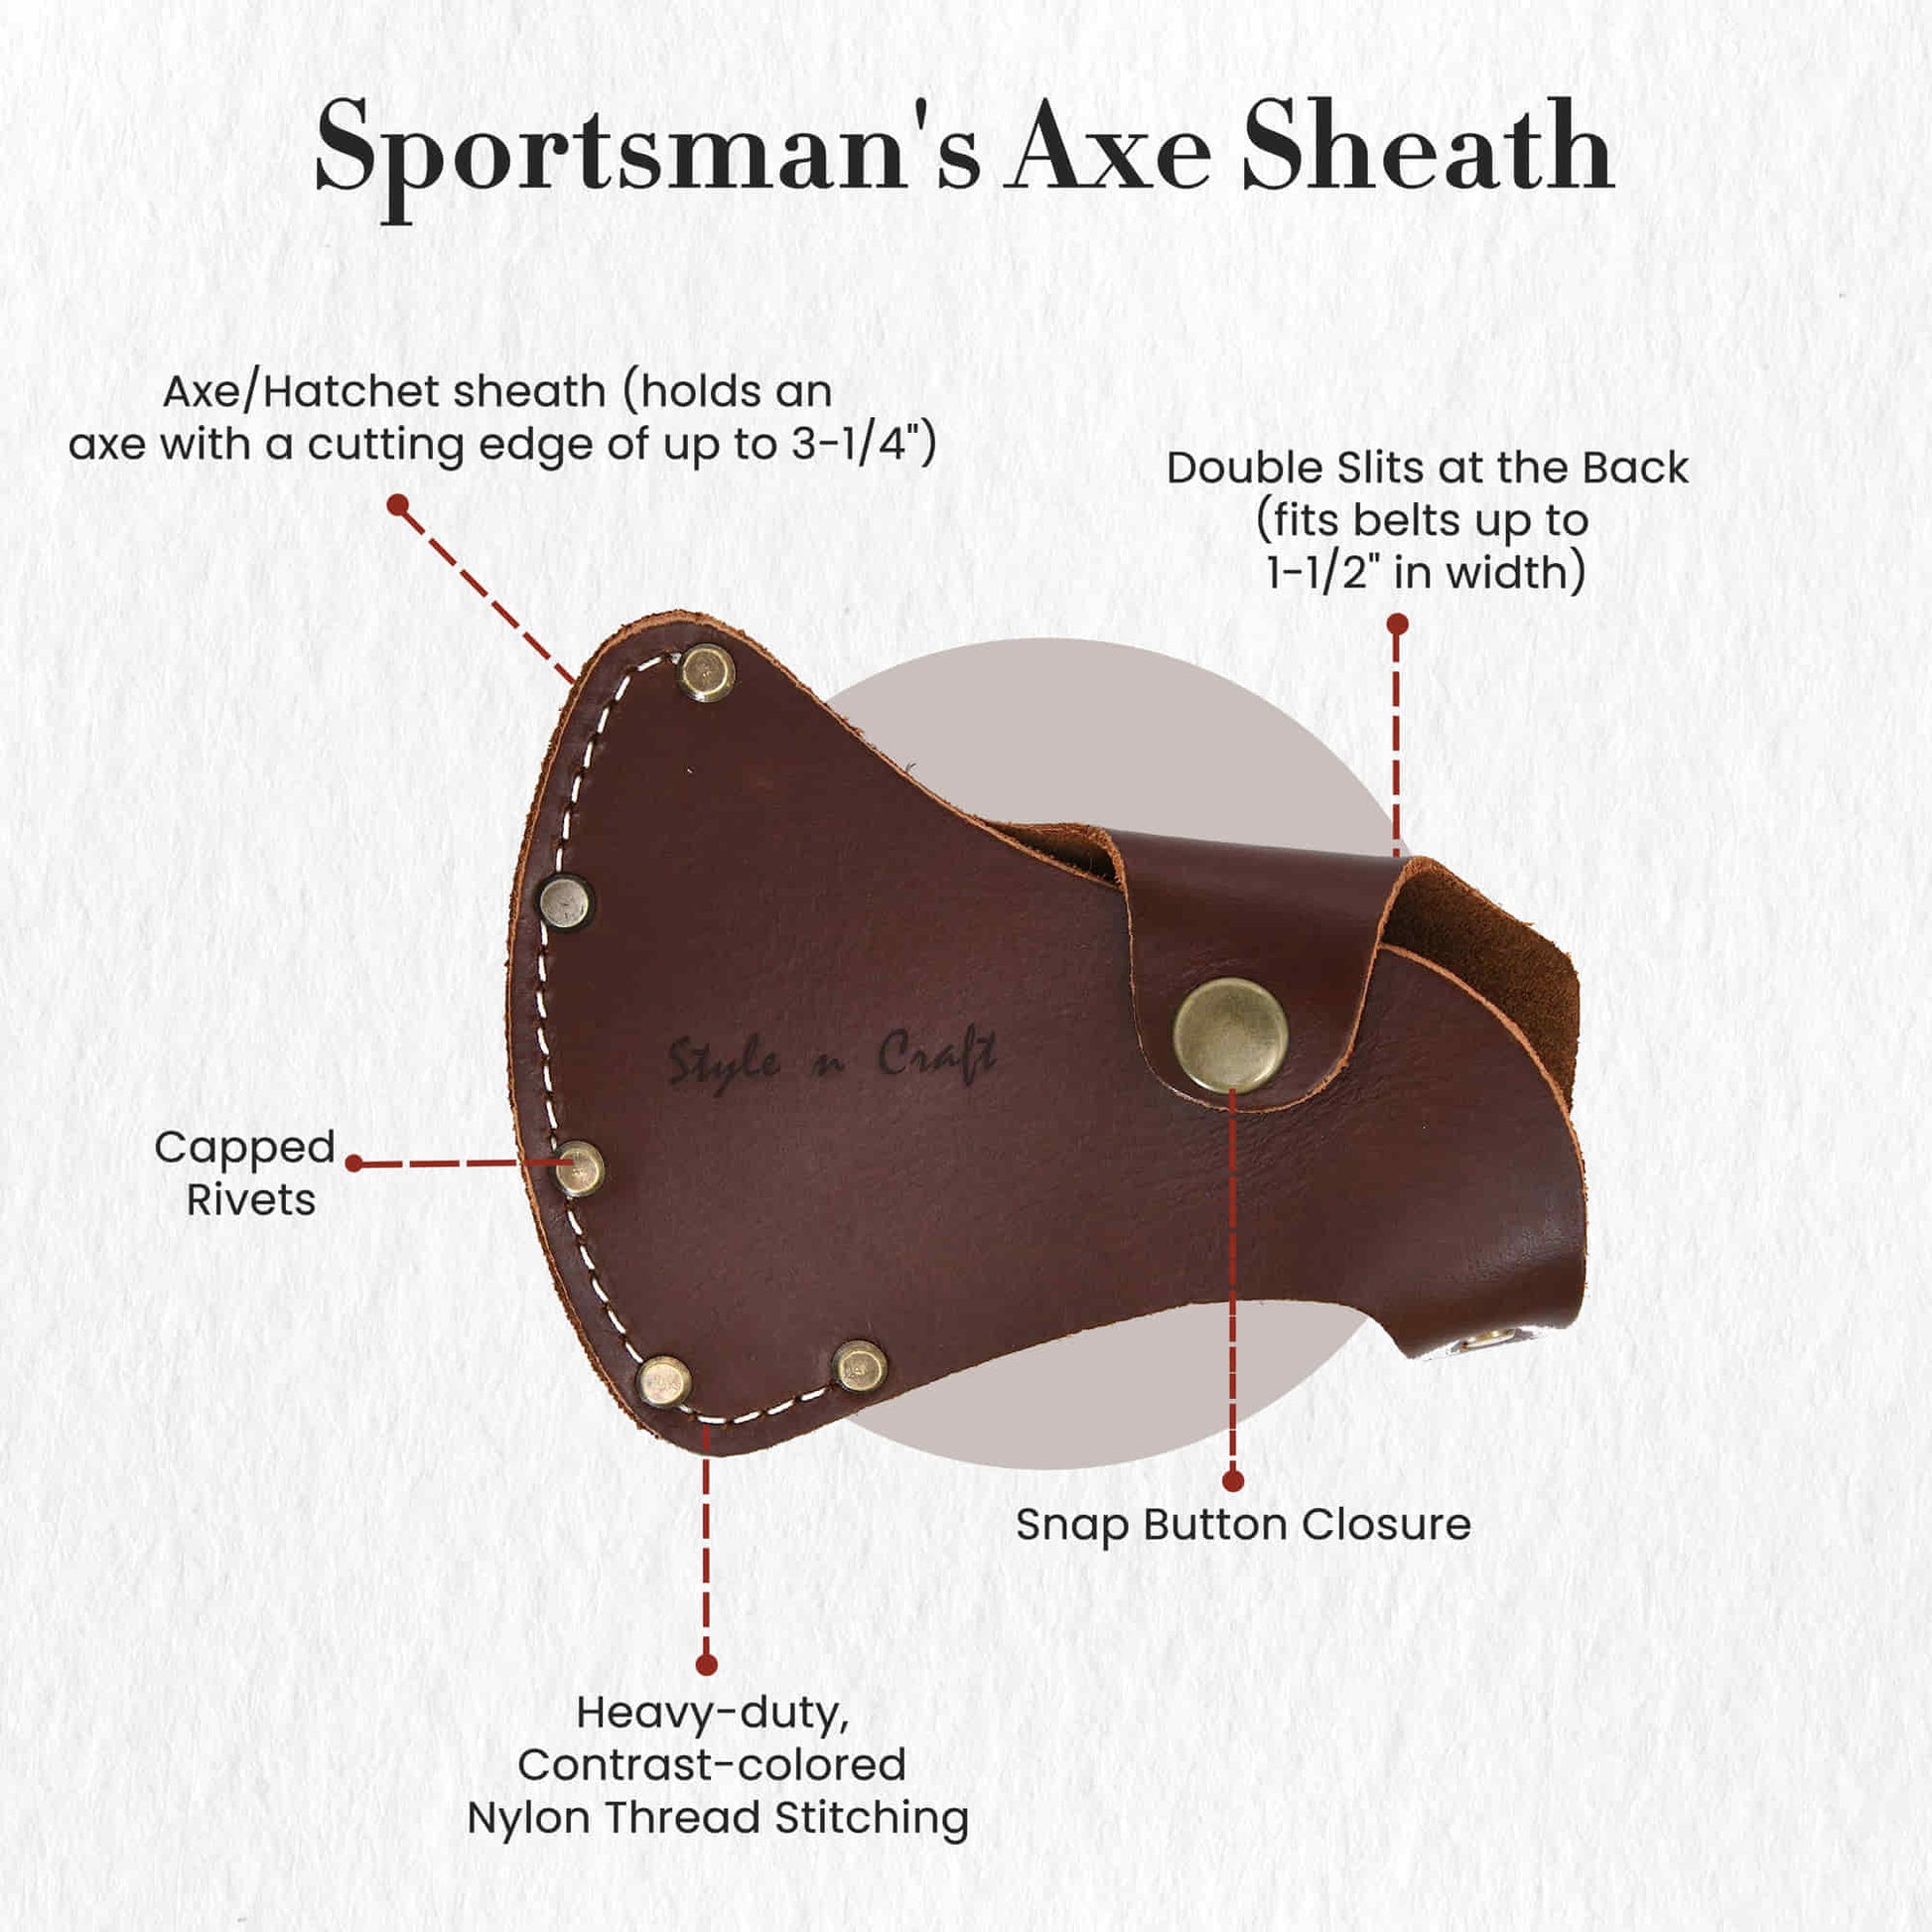 Style n Craft 98026 - Sportsman's Axe Sheath / Axe Cover in Heavy Full Grain Leather in Dark Tan Color - Front View Showing the Details